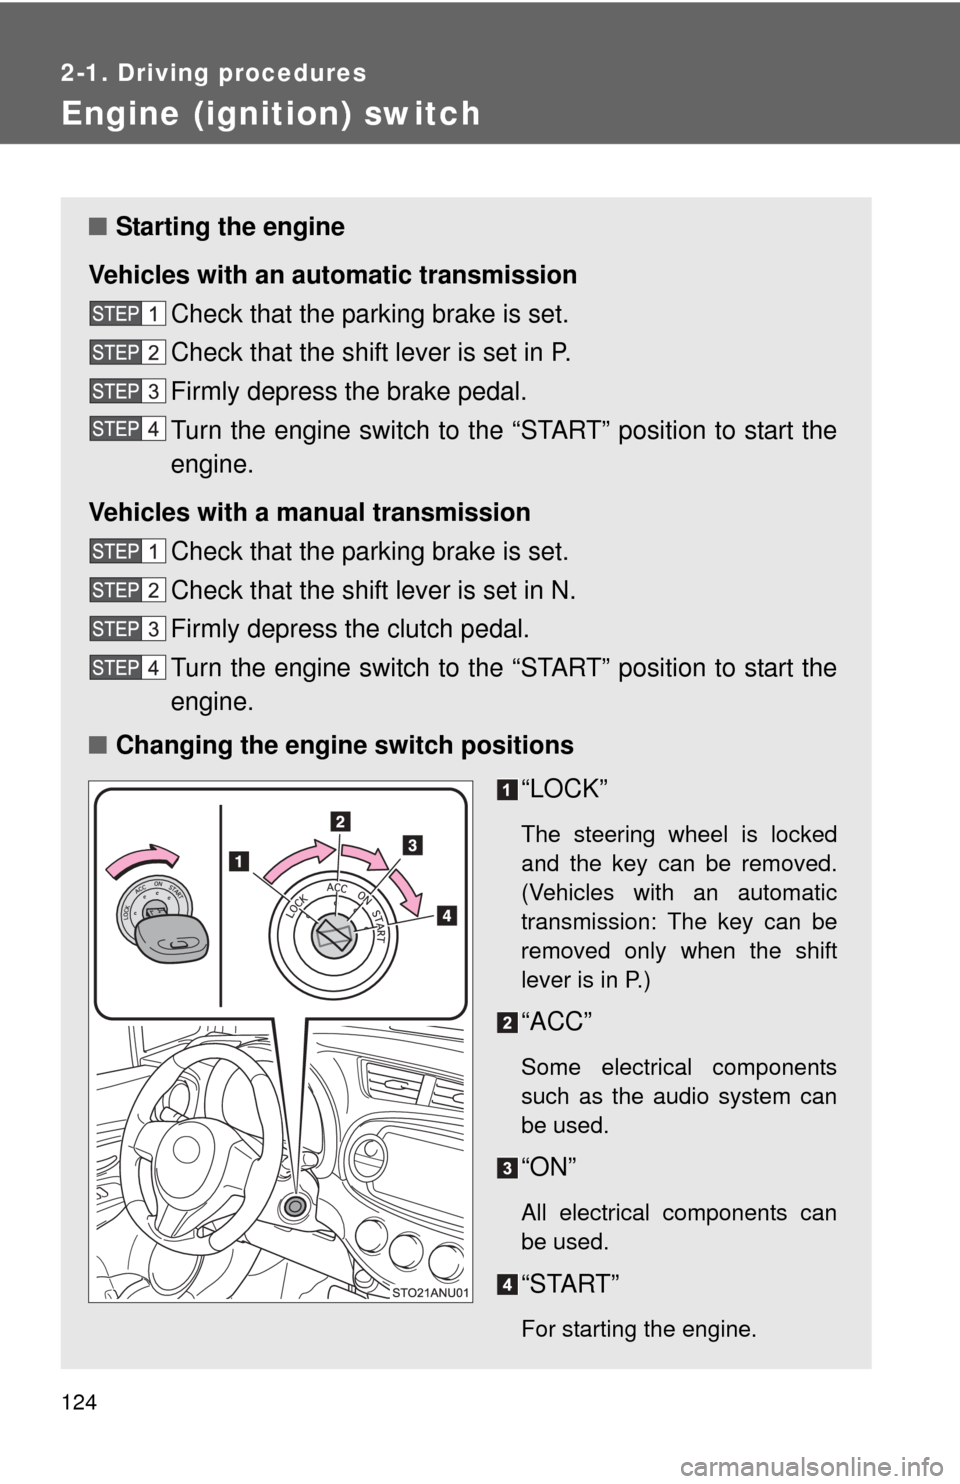 TOYOTA YARIS 2013 3.G Owners Manual 124
2-1. Driving procedures
Engine (ignition) switch 
■Starting the engine
Vehicles with an au tomatic transmission
Check that the parking brake is set.
Check that the shift lever is set in P.
Firml